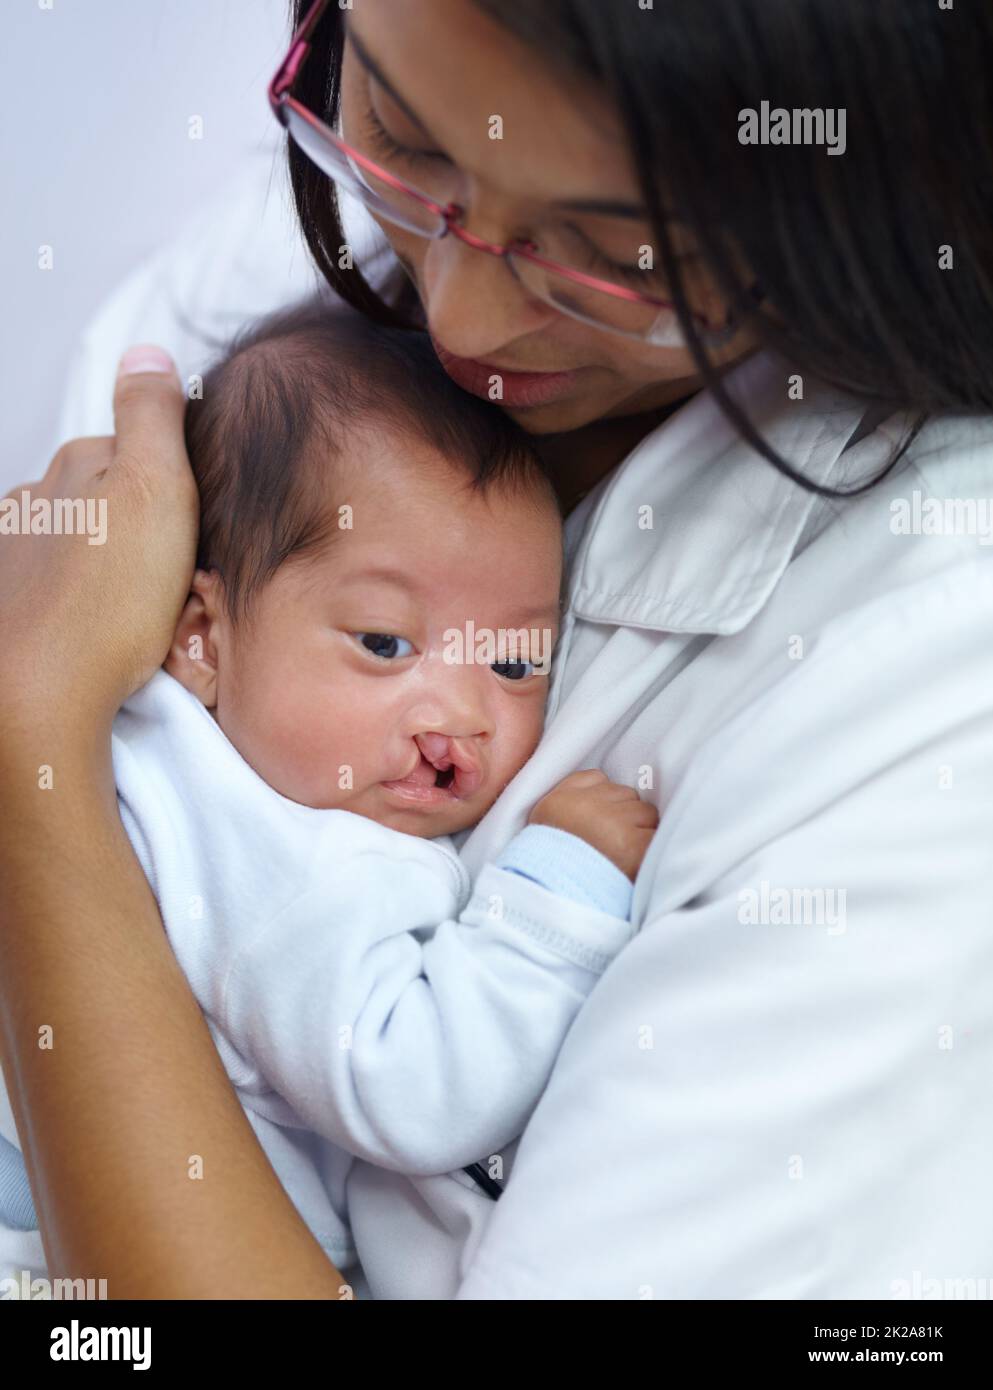 Giving comfort is key in her profession. Shot of a young female nurse holding a baby who has a cleft palate. Stock Photo